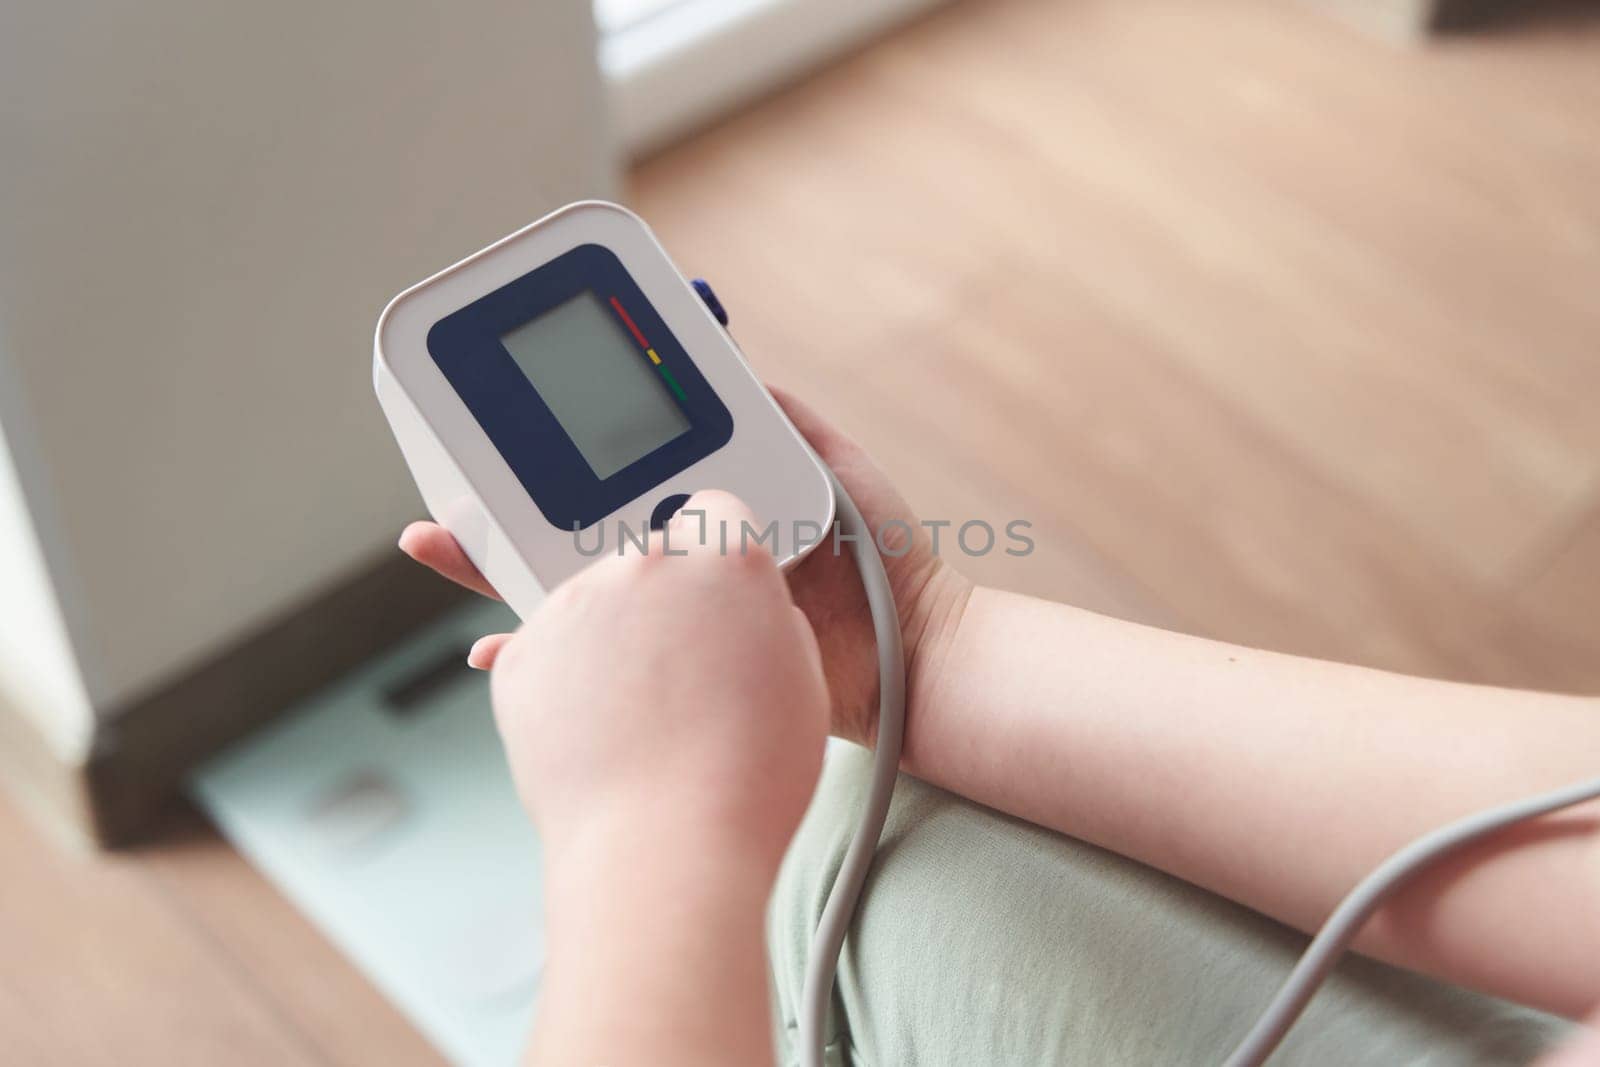 Selective focus girl is taking care for health with hearth beat monitor and blood pressure and heart rate monitor with digital pressure gauge. Health care and Medical concept. The topic of high blood pressure is hypertension disease. Close-up macro young caucasian woman hands using automatic tonometer to check pressure at home in bedroom on bed.